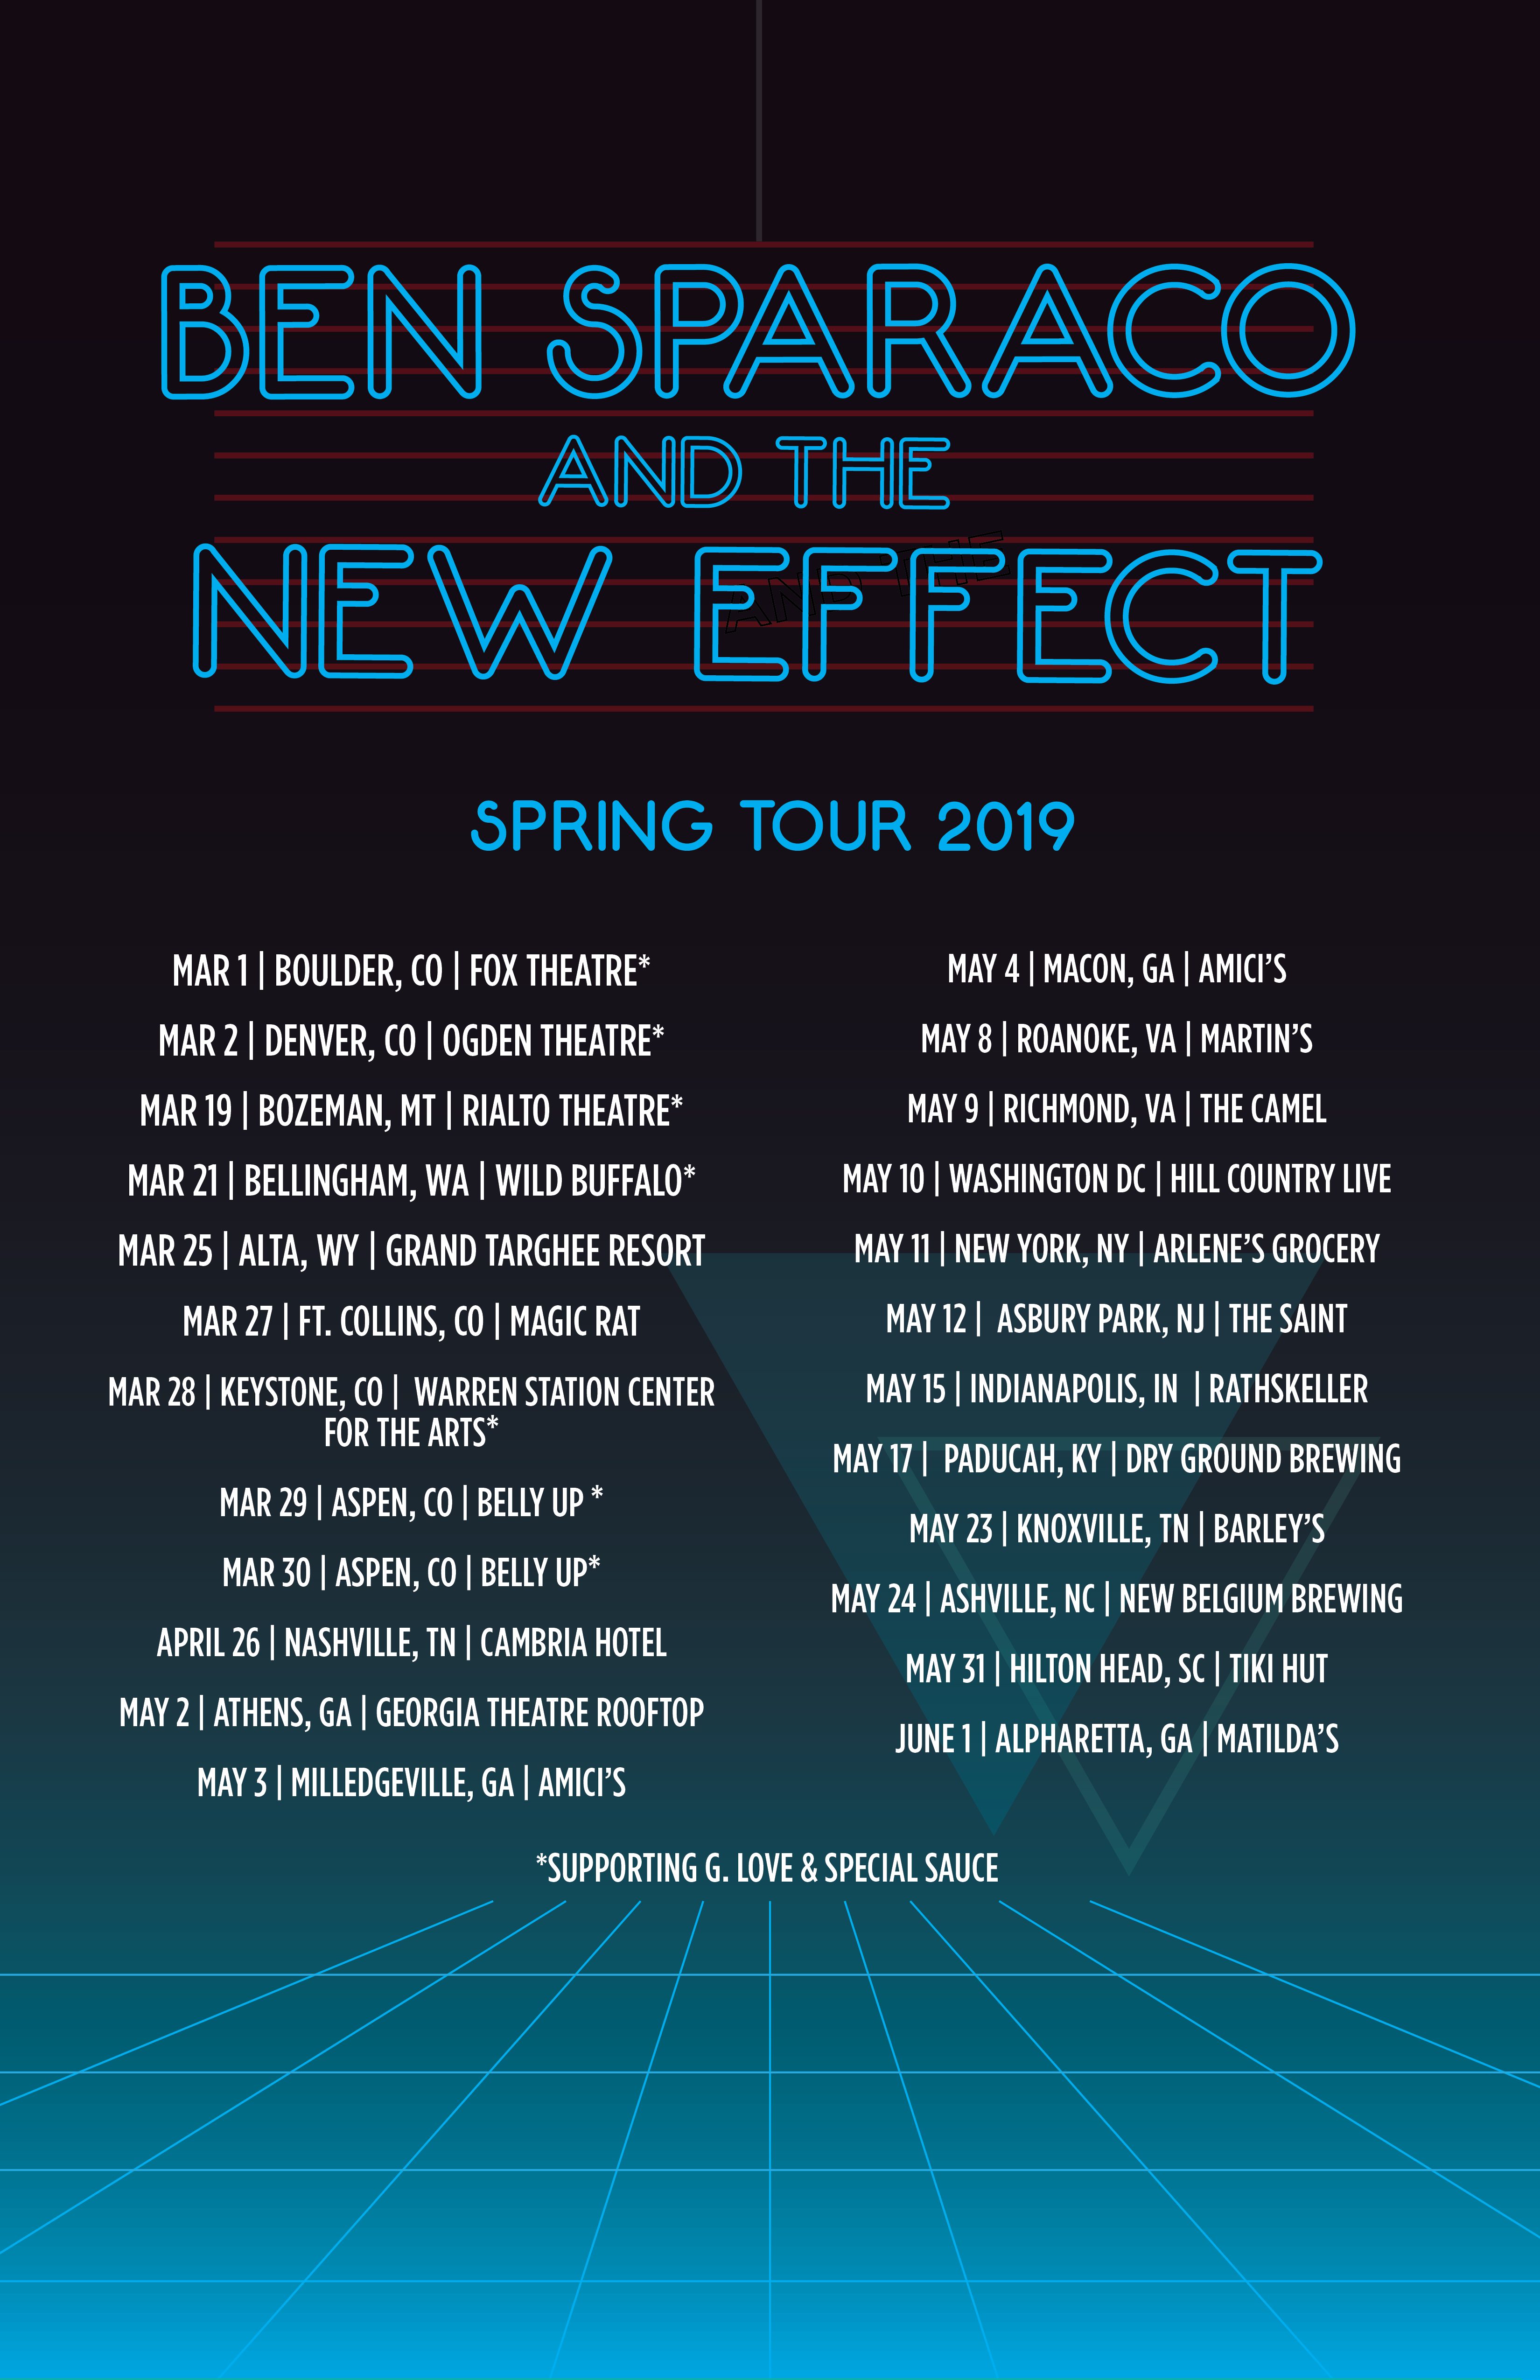 Ben Sparaco and The New Effect’s 2019 spring tour